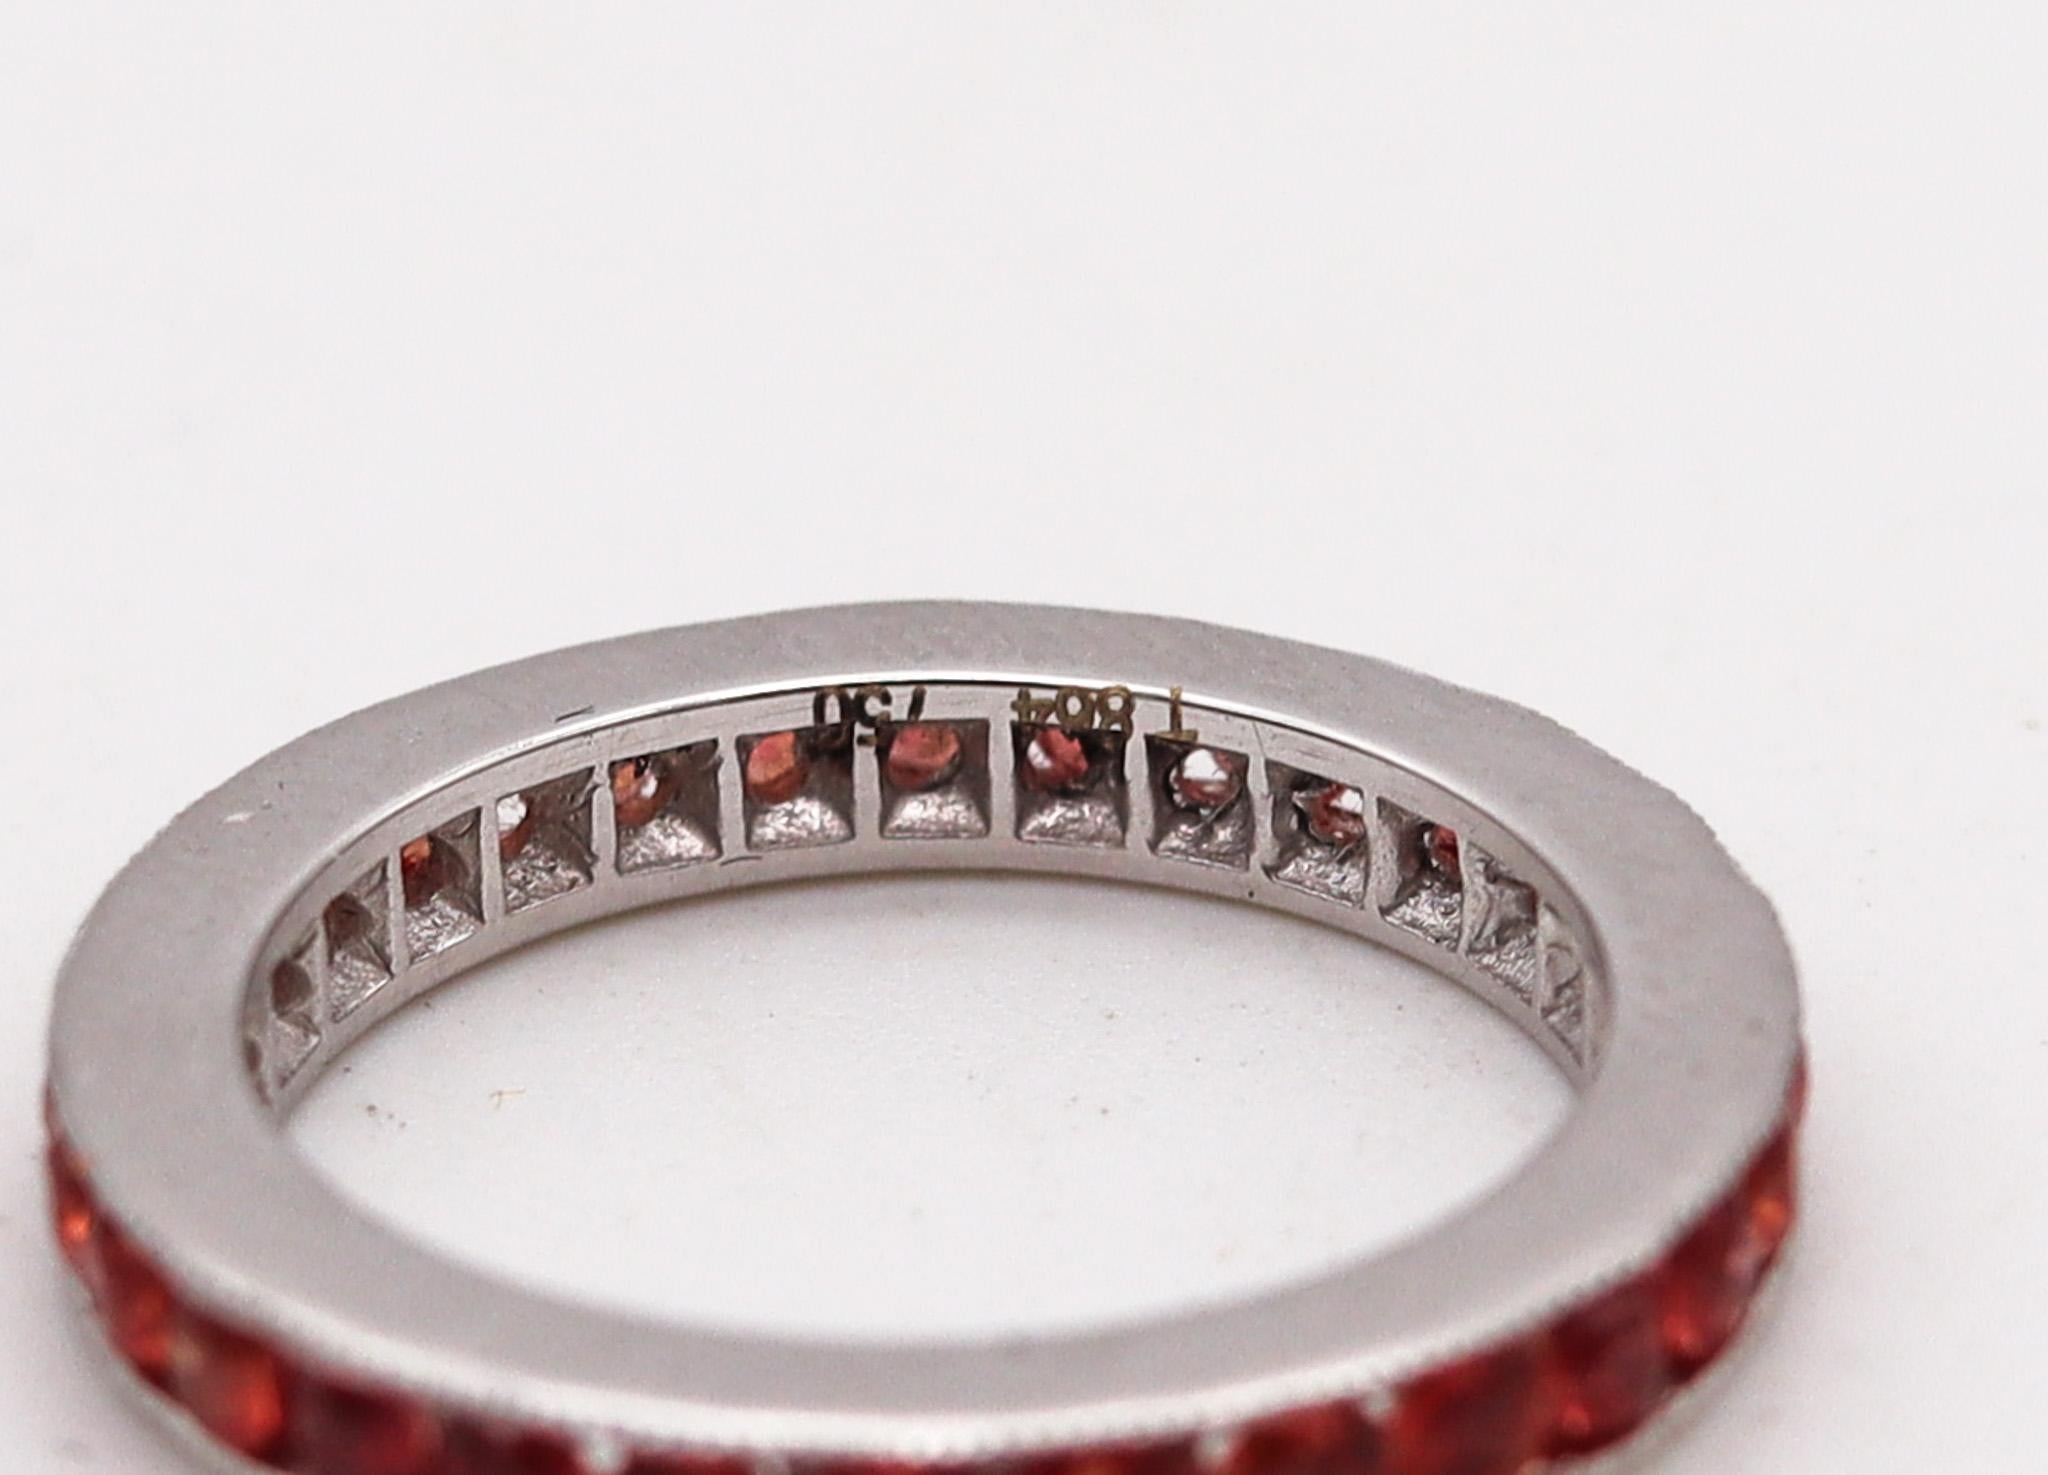 Modernist Italian Eternity Ring Band In 18 Kt White Gold With 1.68 Ctw In Reddish Sapphire For Sale